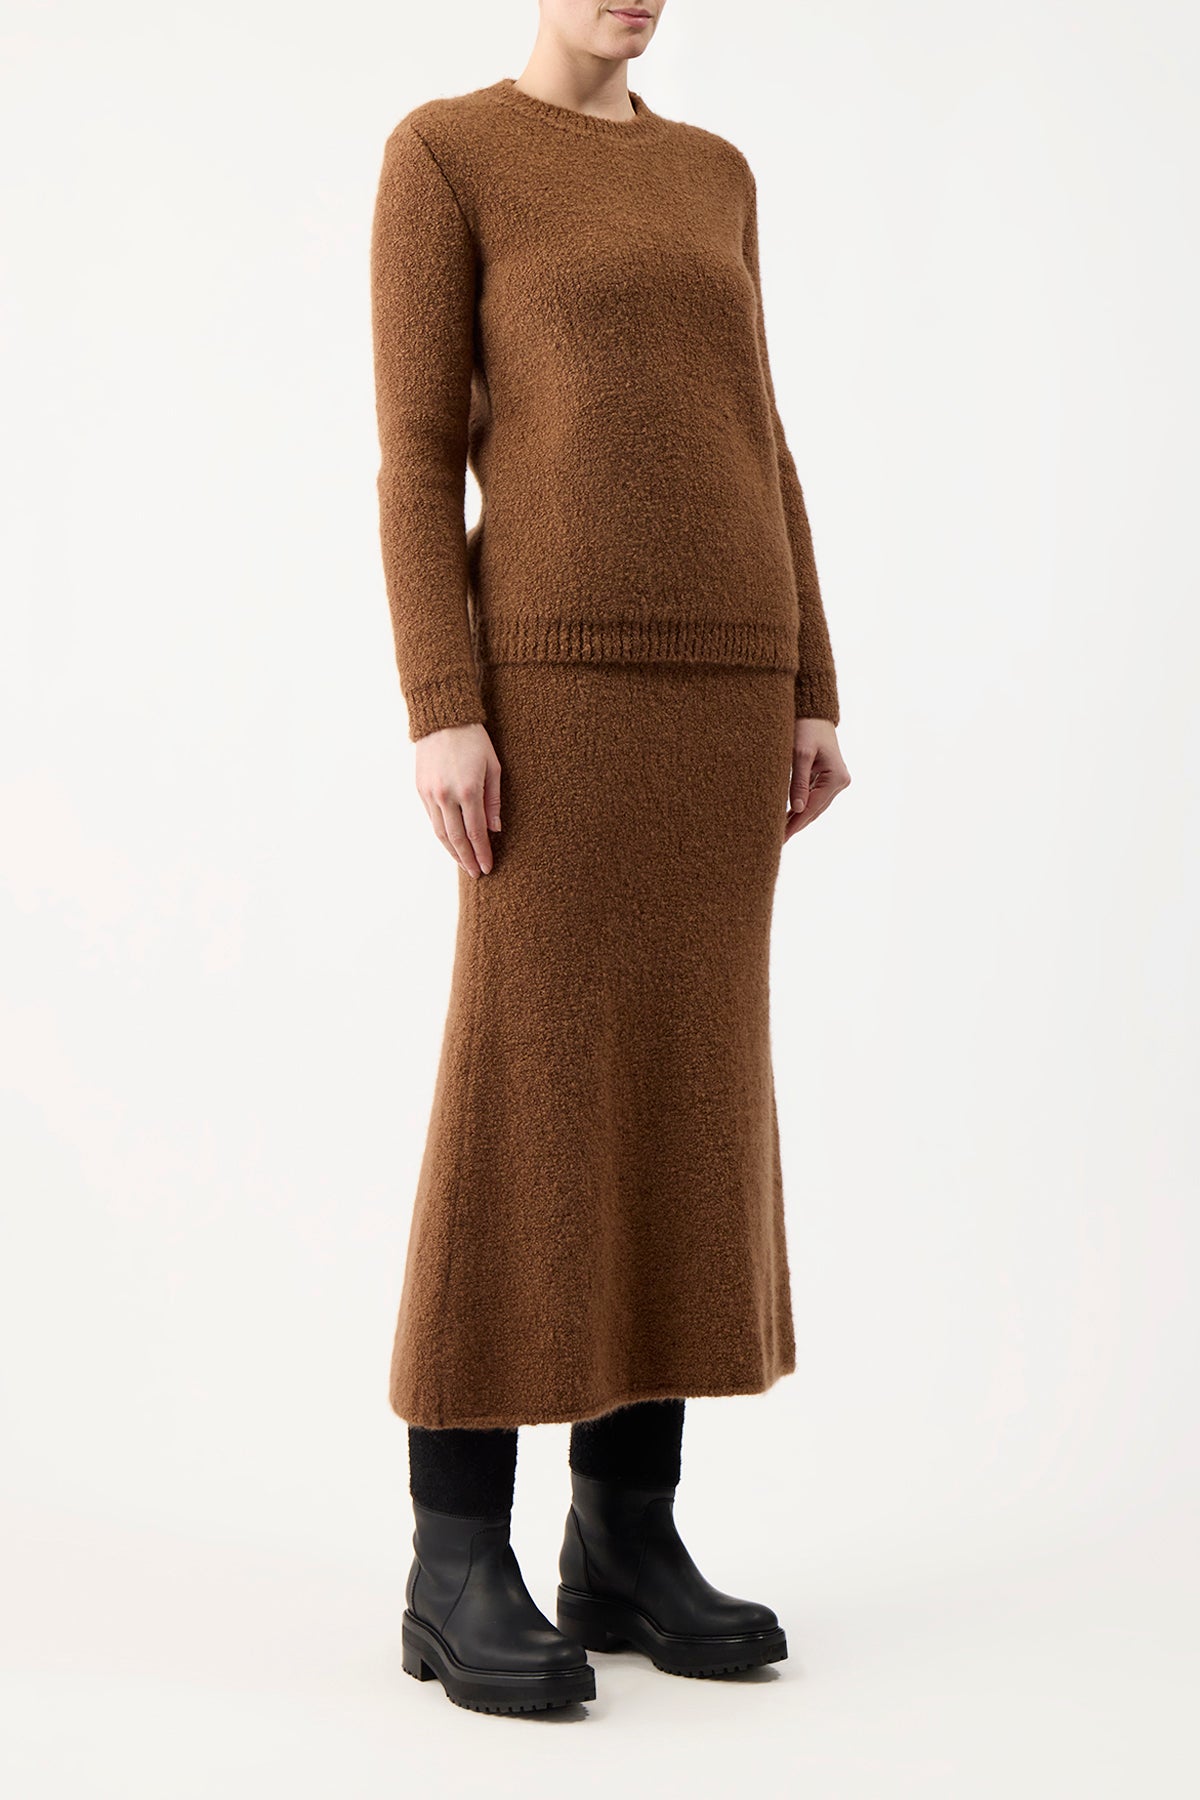 Philippe Knit Sweater in Cognac Cashmere Boucle